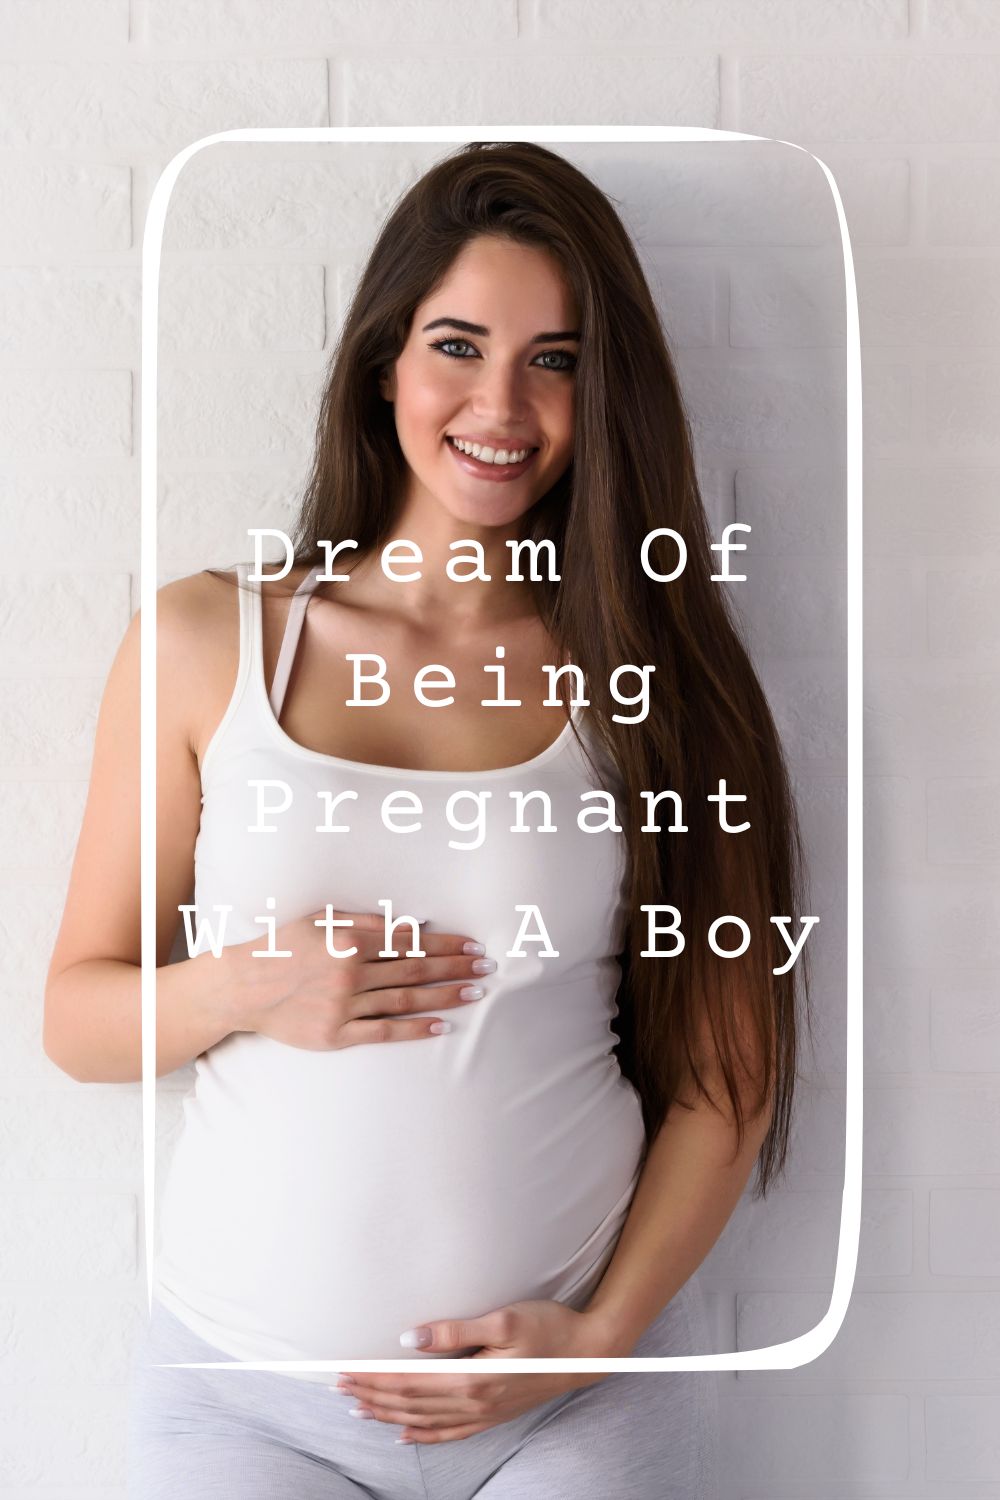 Dream Of Being Pregnant With A Boy Meanings 2